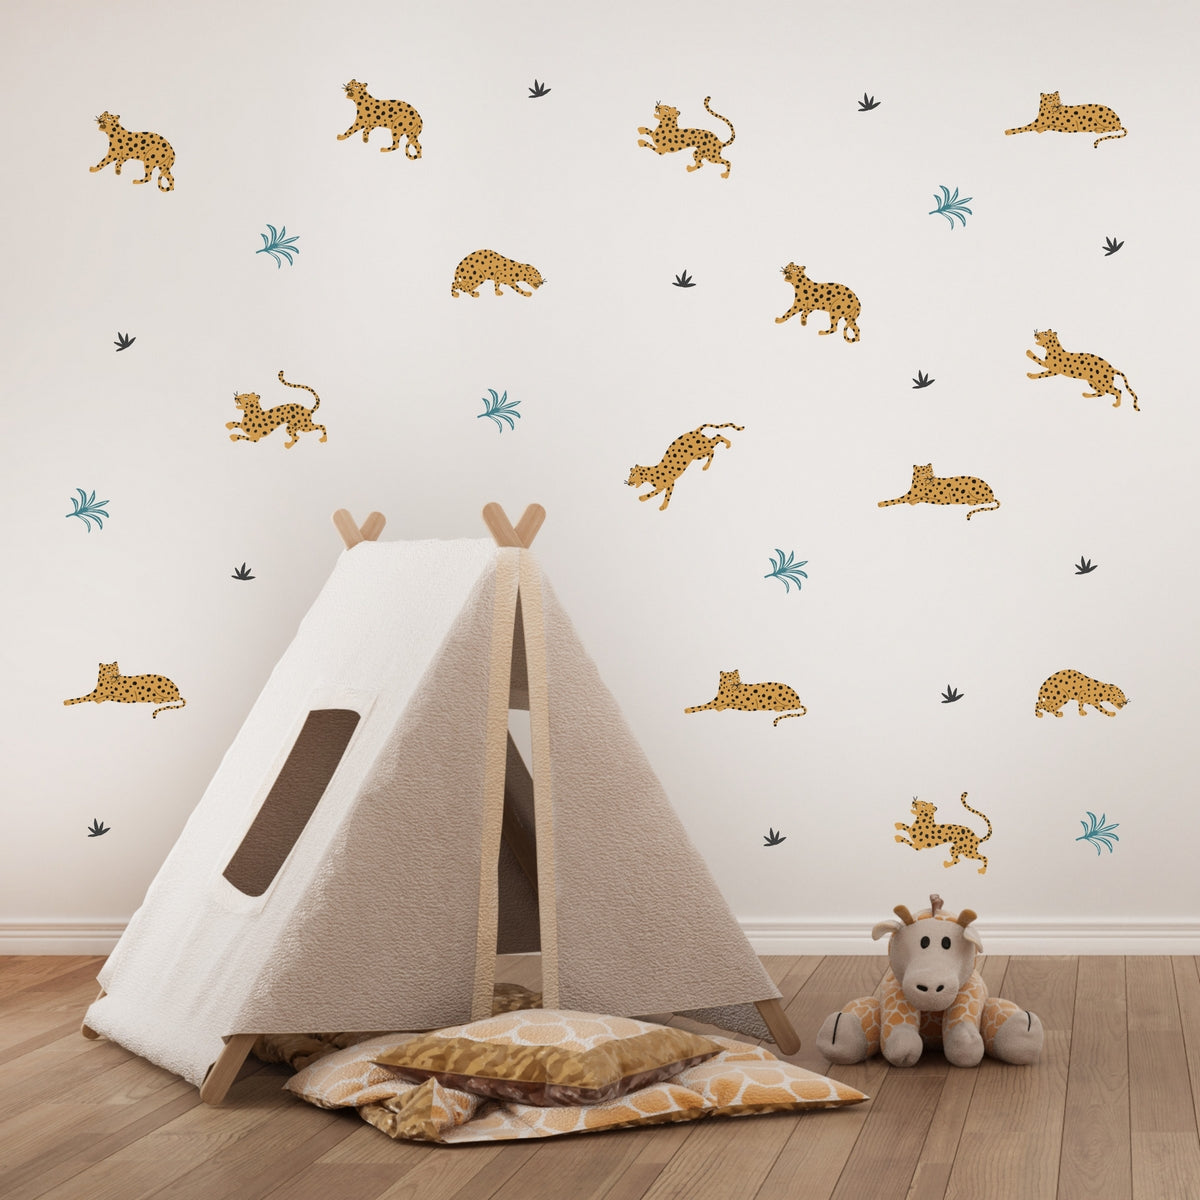 Leopards Wall Decals